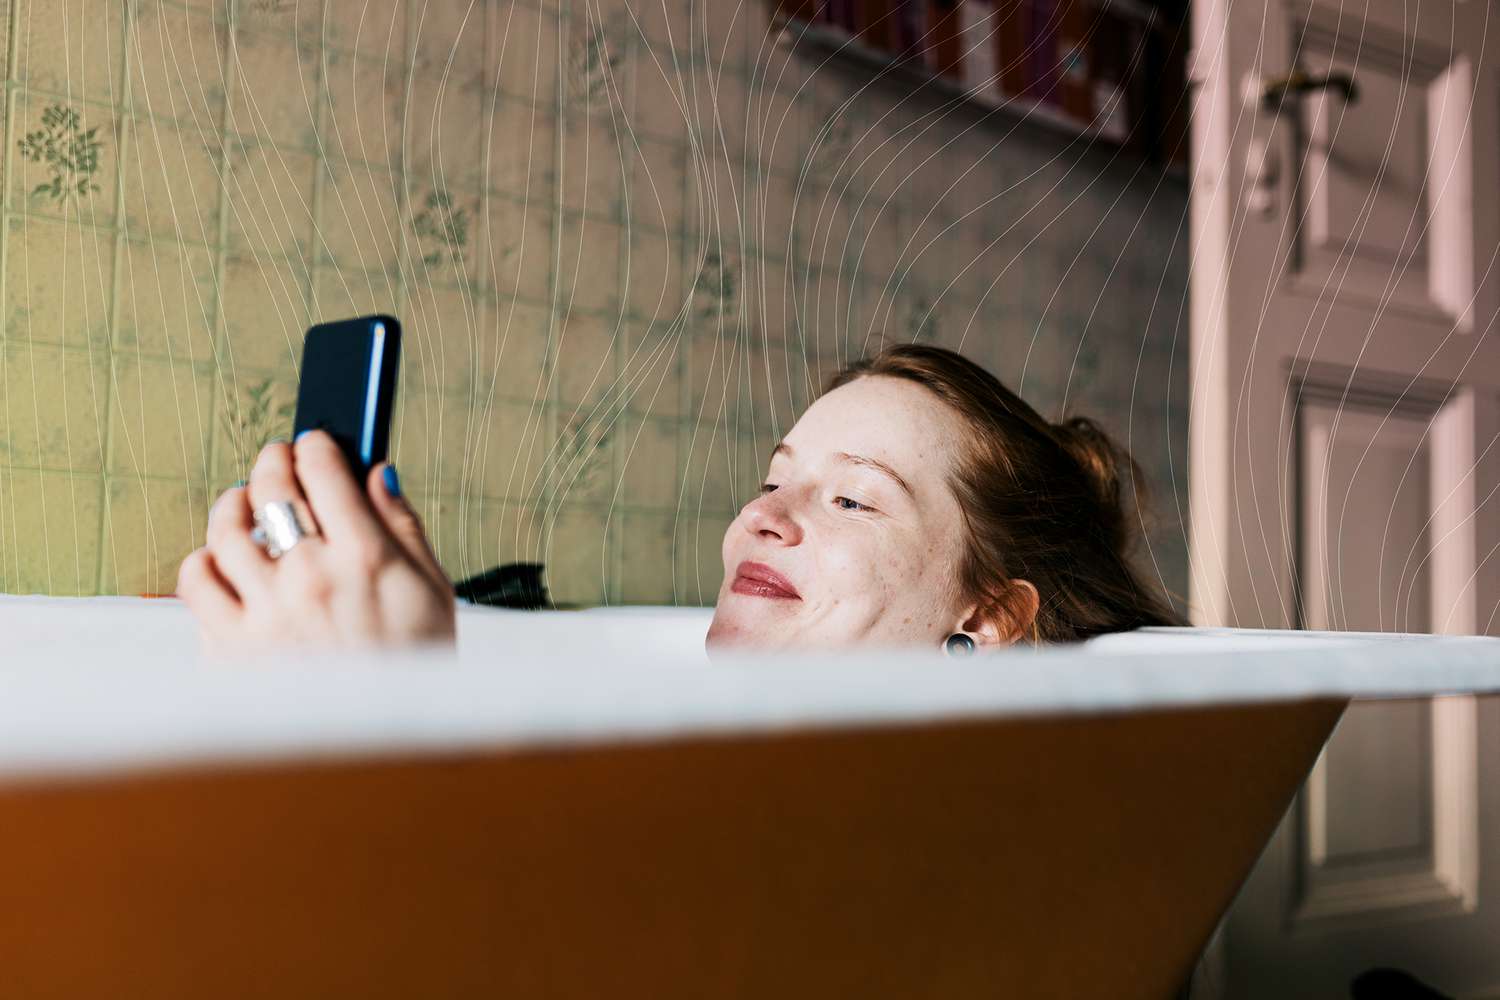 Woman Taking Bath And Smiling While Messaging Someone